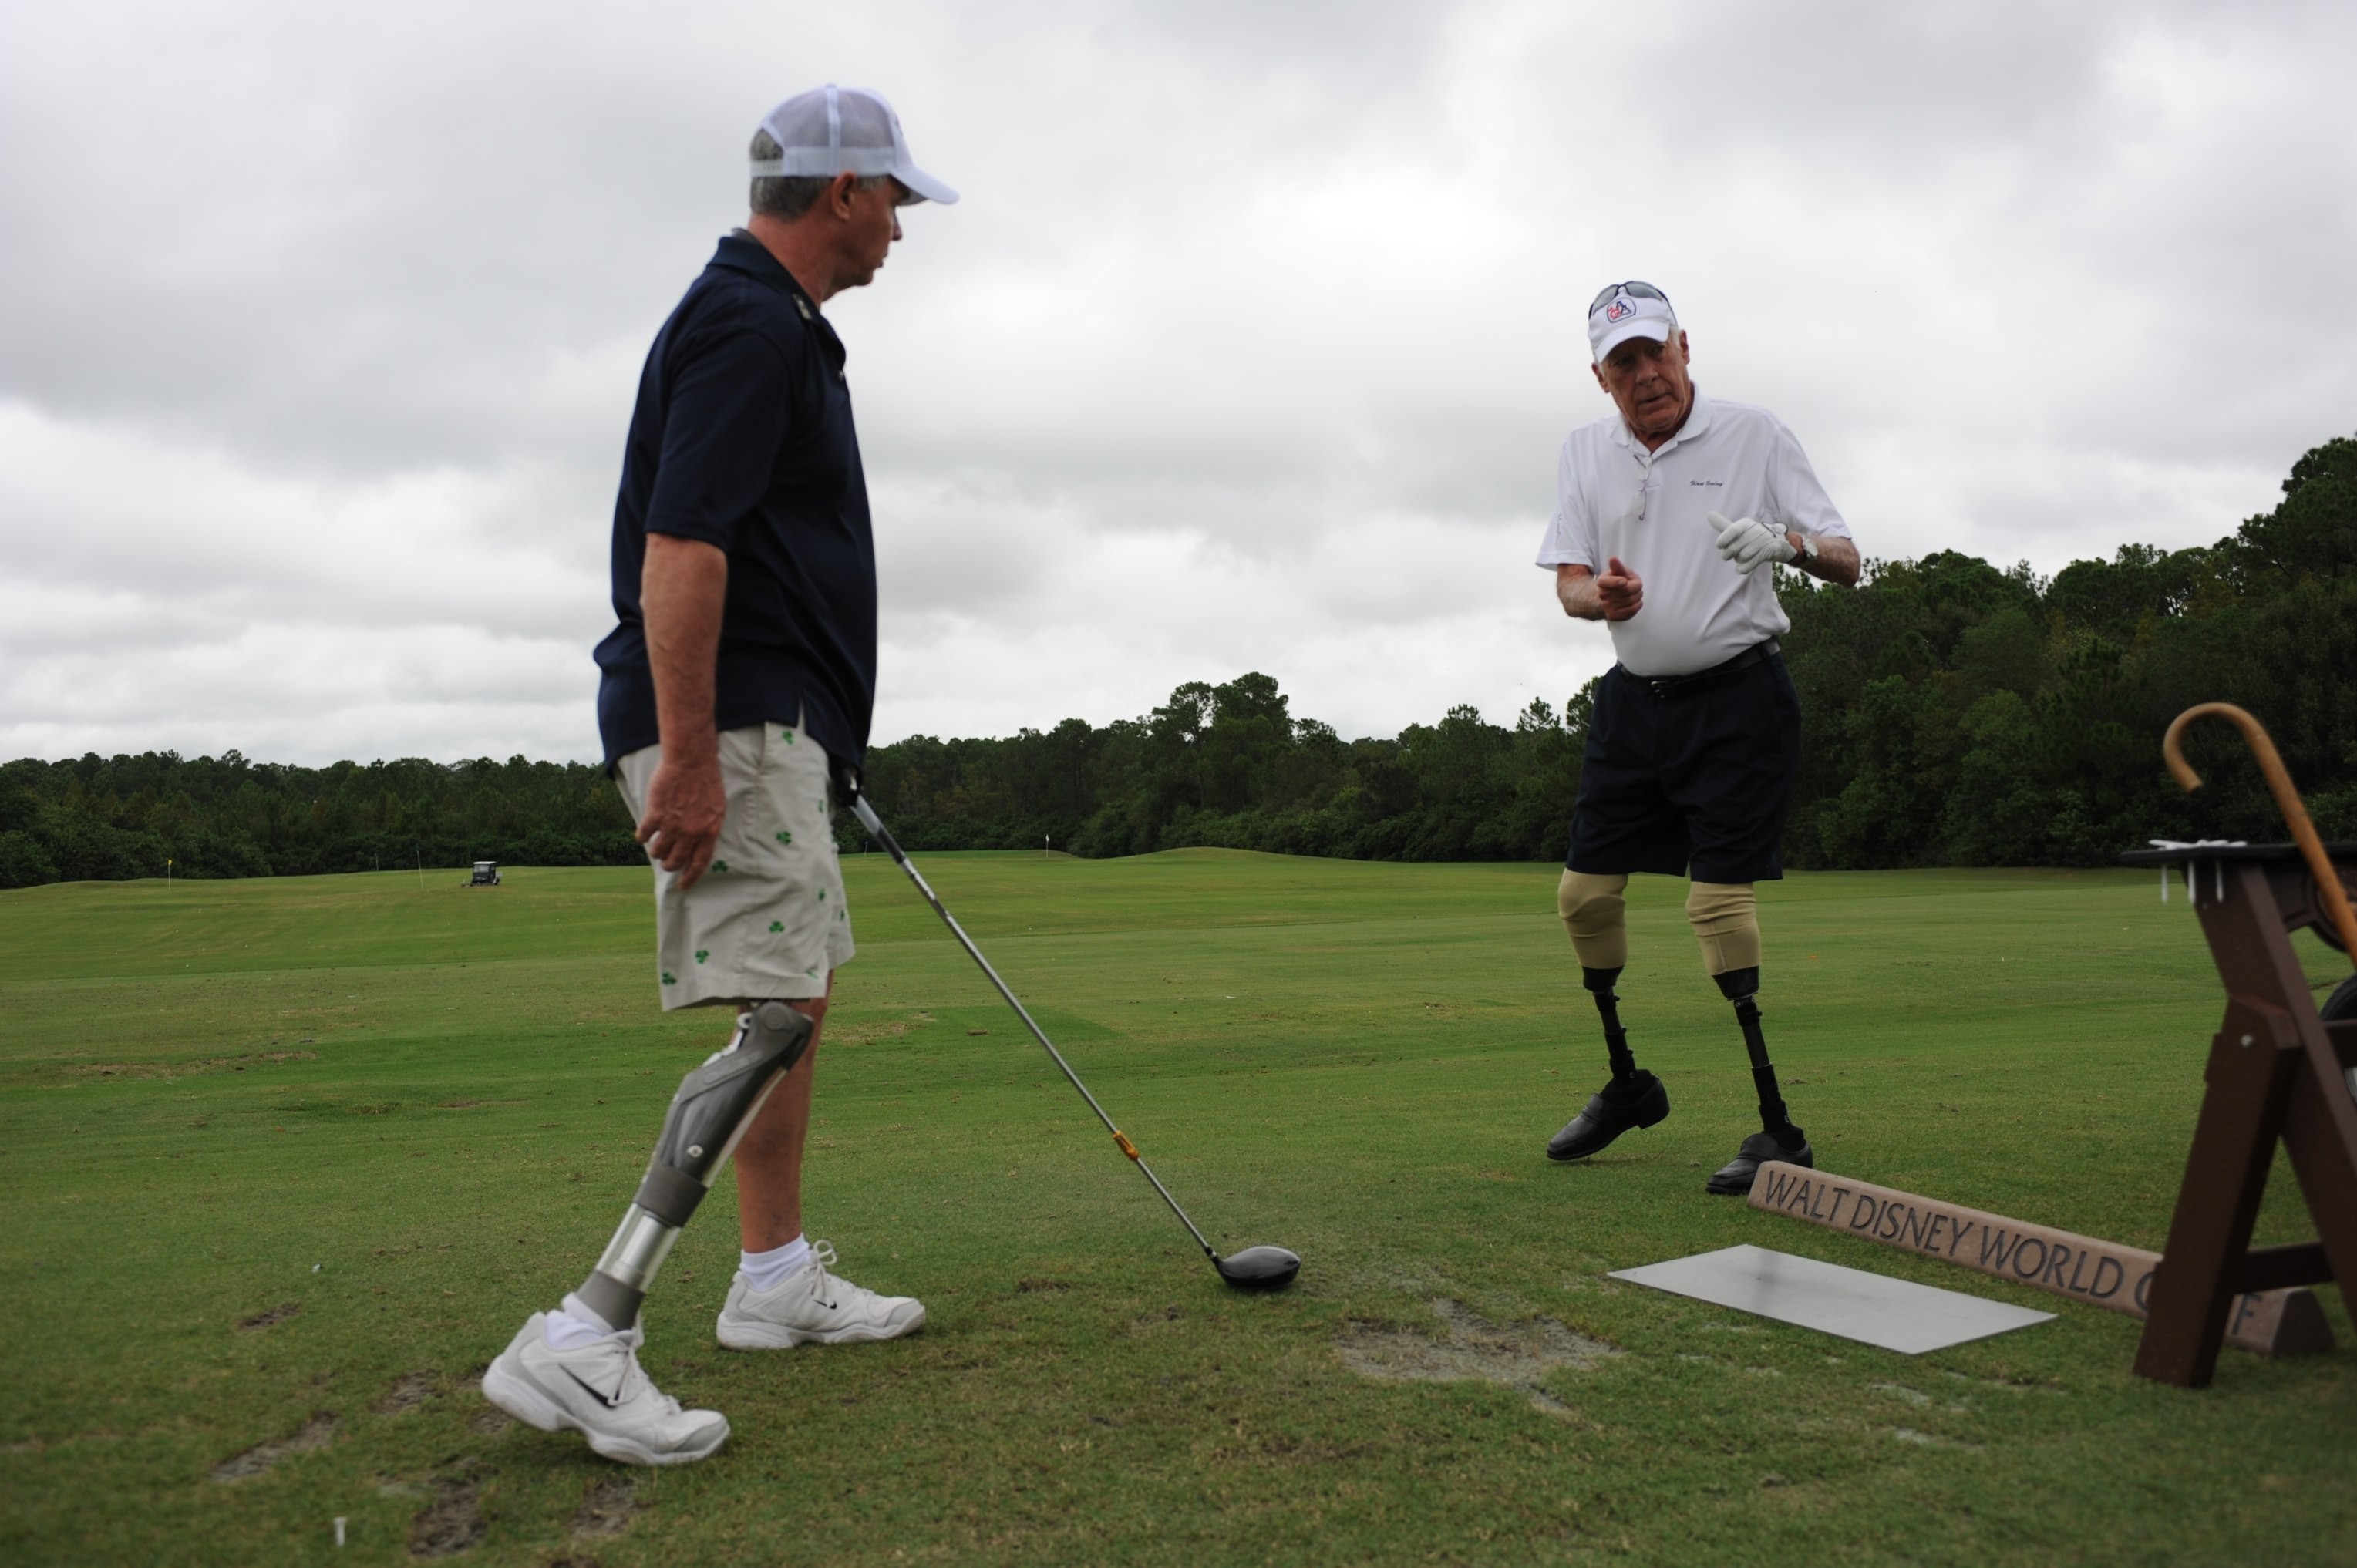 Golf instructors keep wounded warriors active | Article | The United States  Army